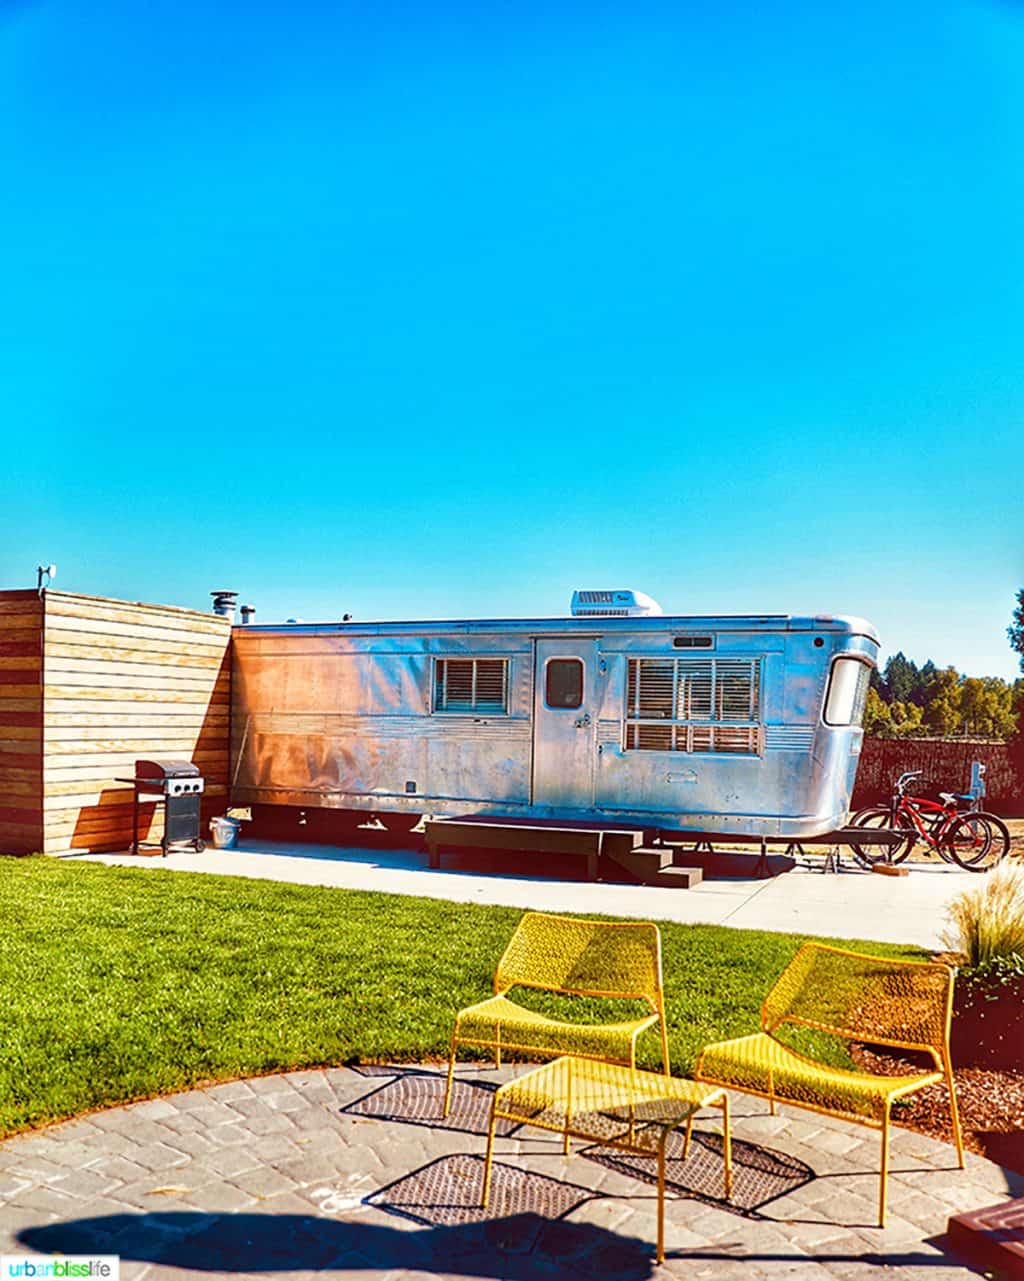 Exterior of the mansion airstream and yellow chairs at Vintages Trailer Resort